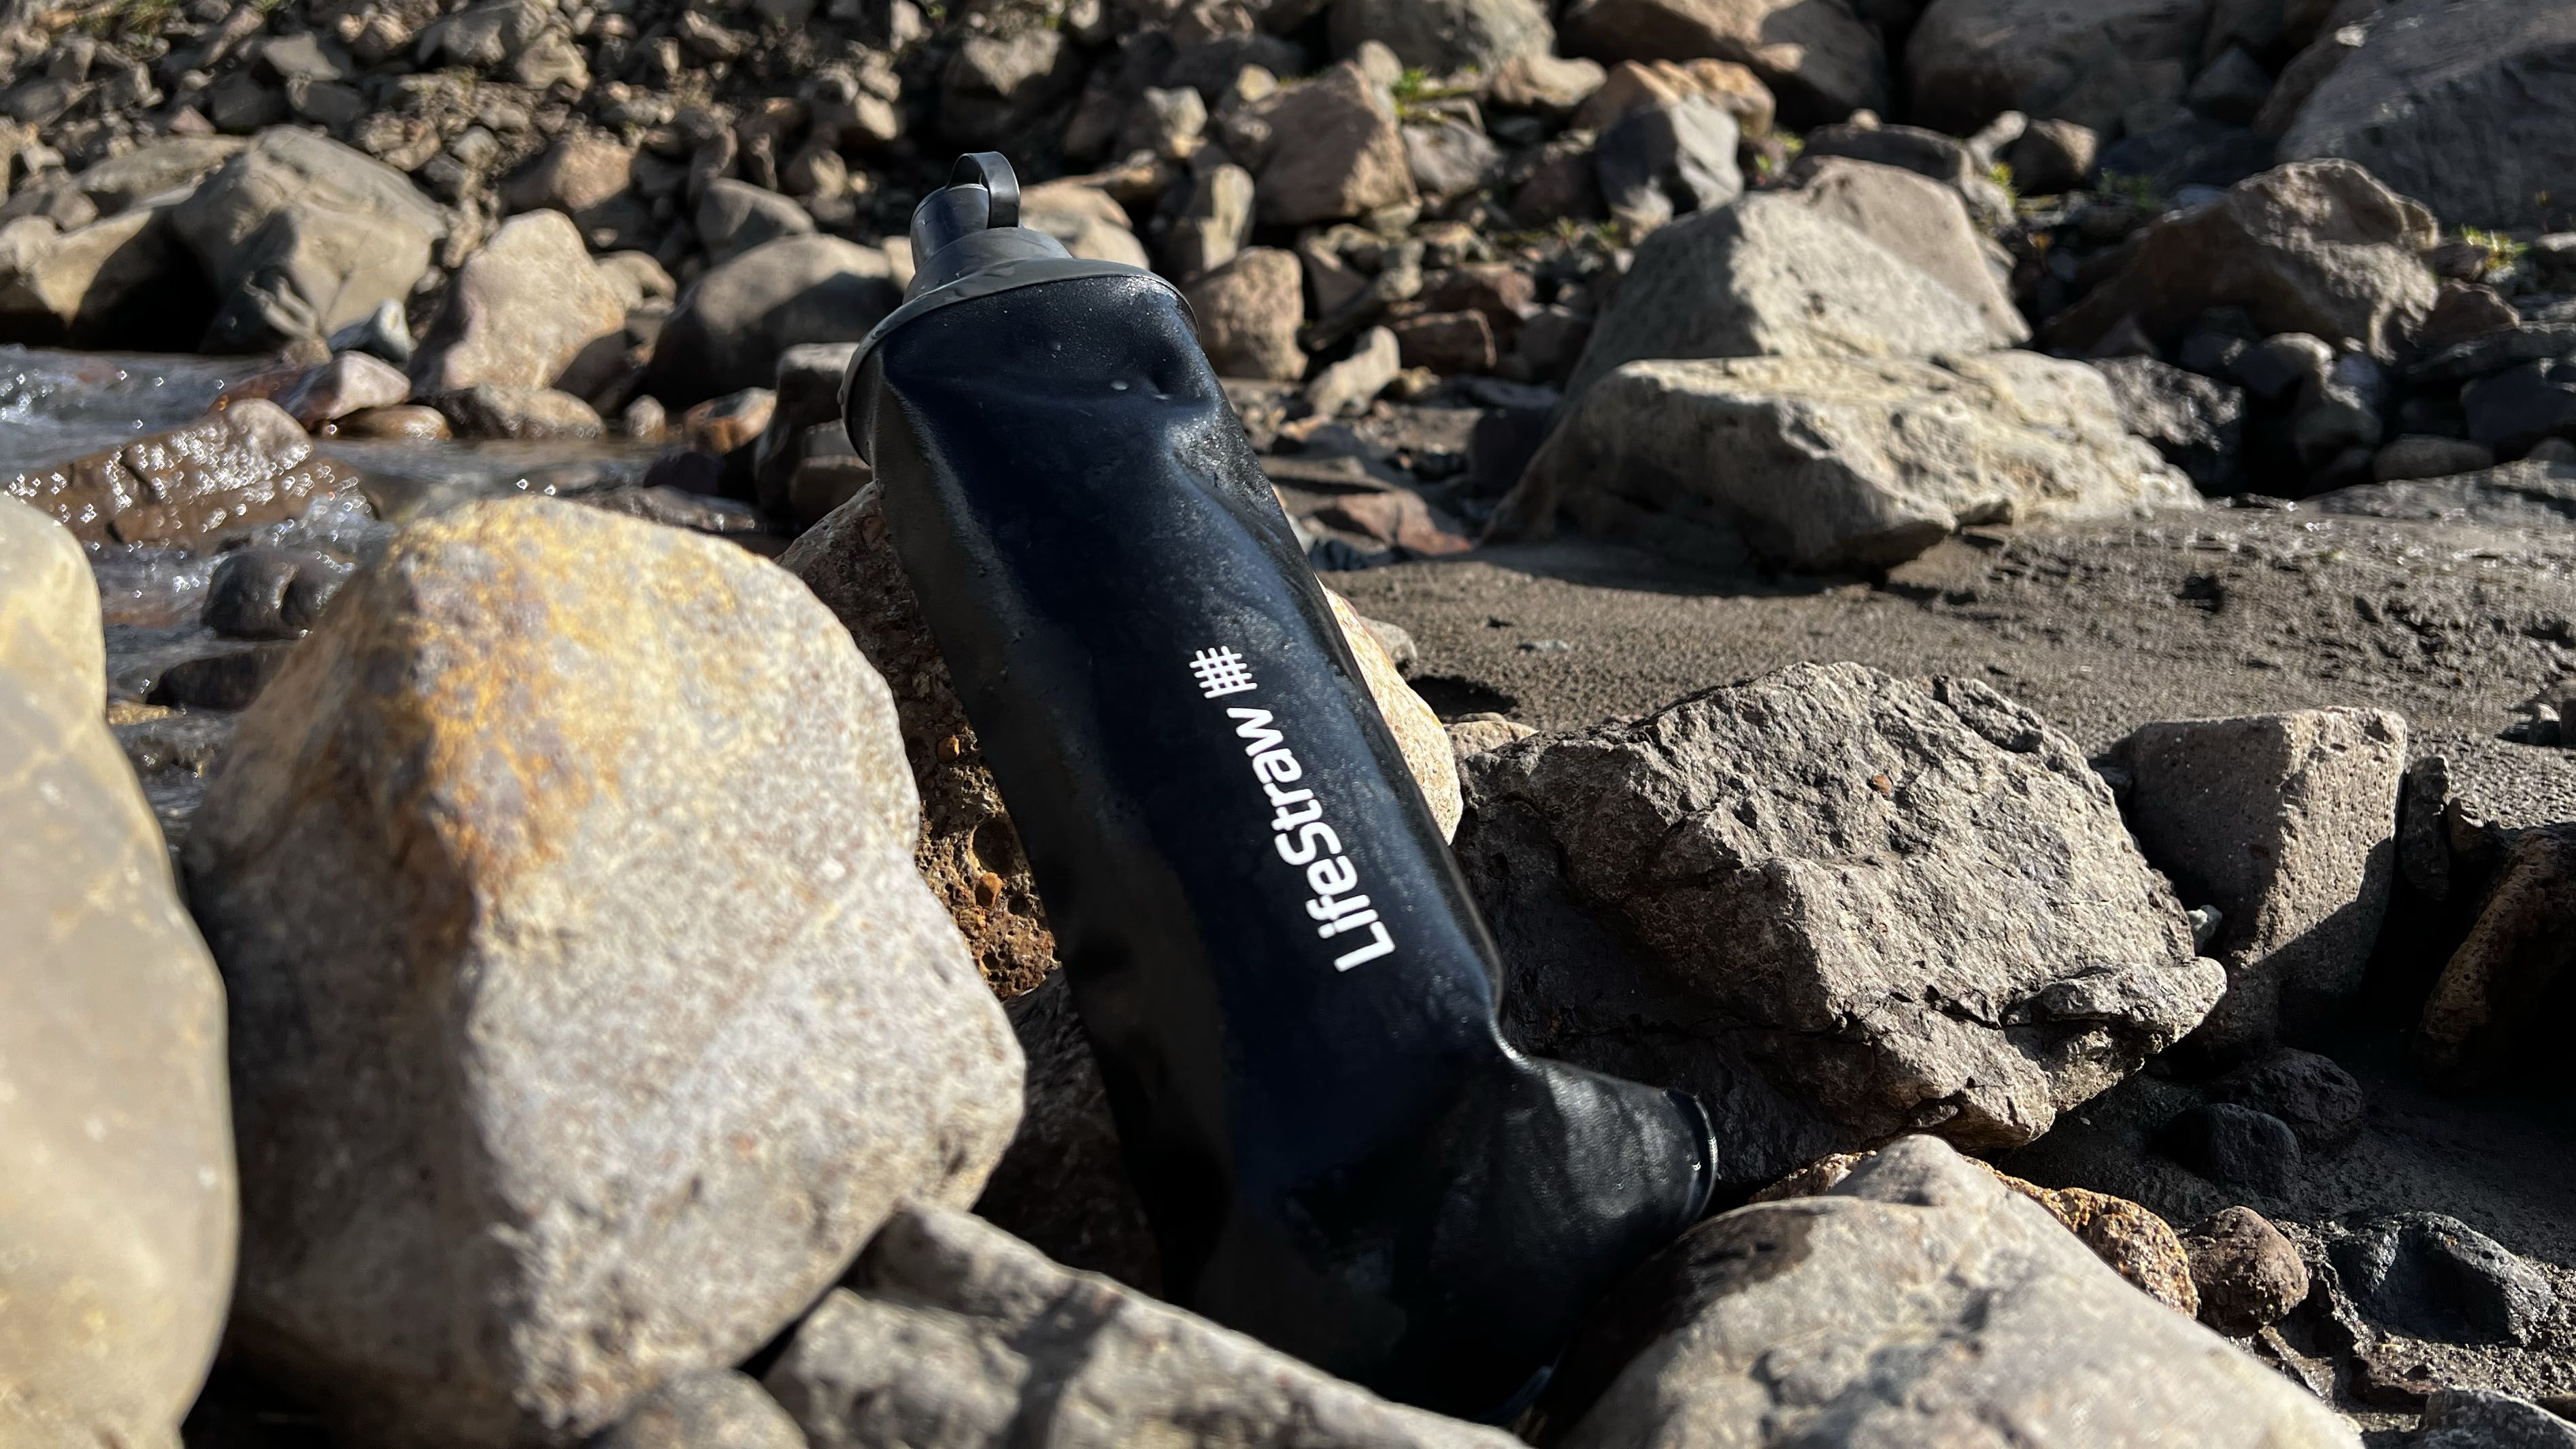 Quick, Not Dirty: The Best Filtered Water Bottles of 2022 » Explorersweb